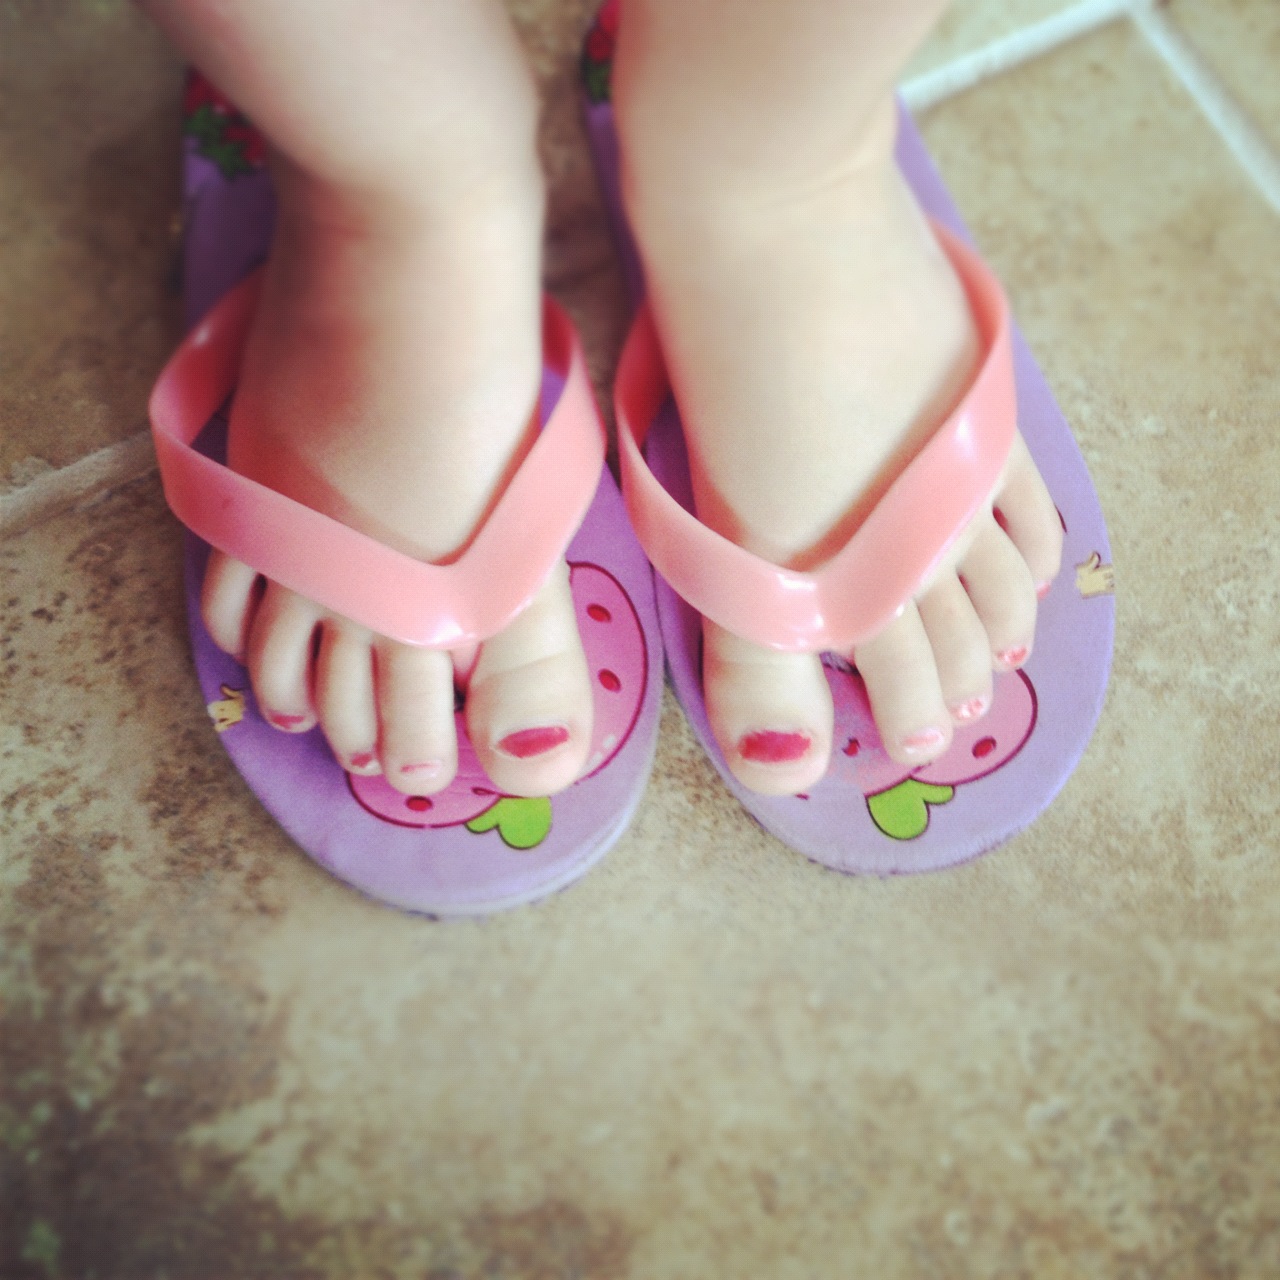 MollyPop Moments: Documenting Life: Your Child's Feet (Week 47)